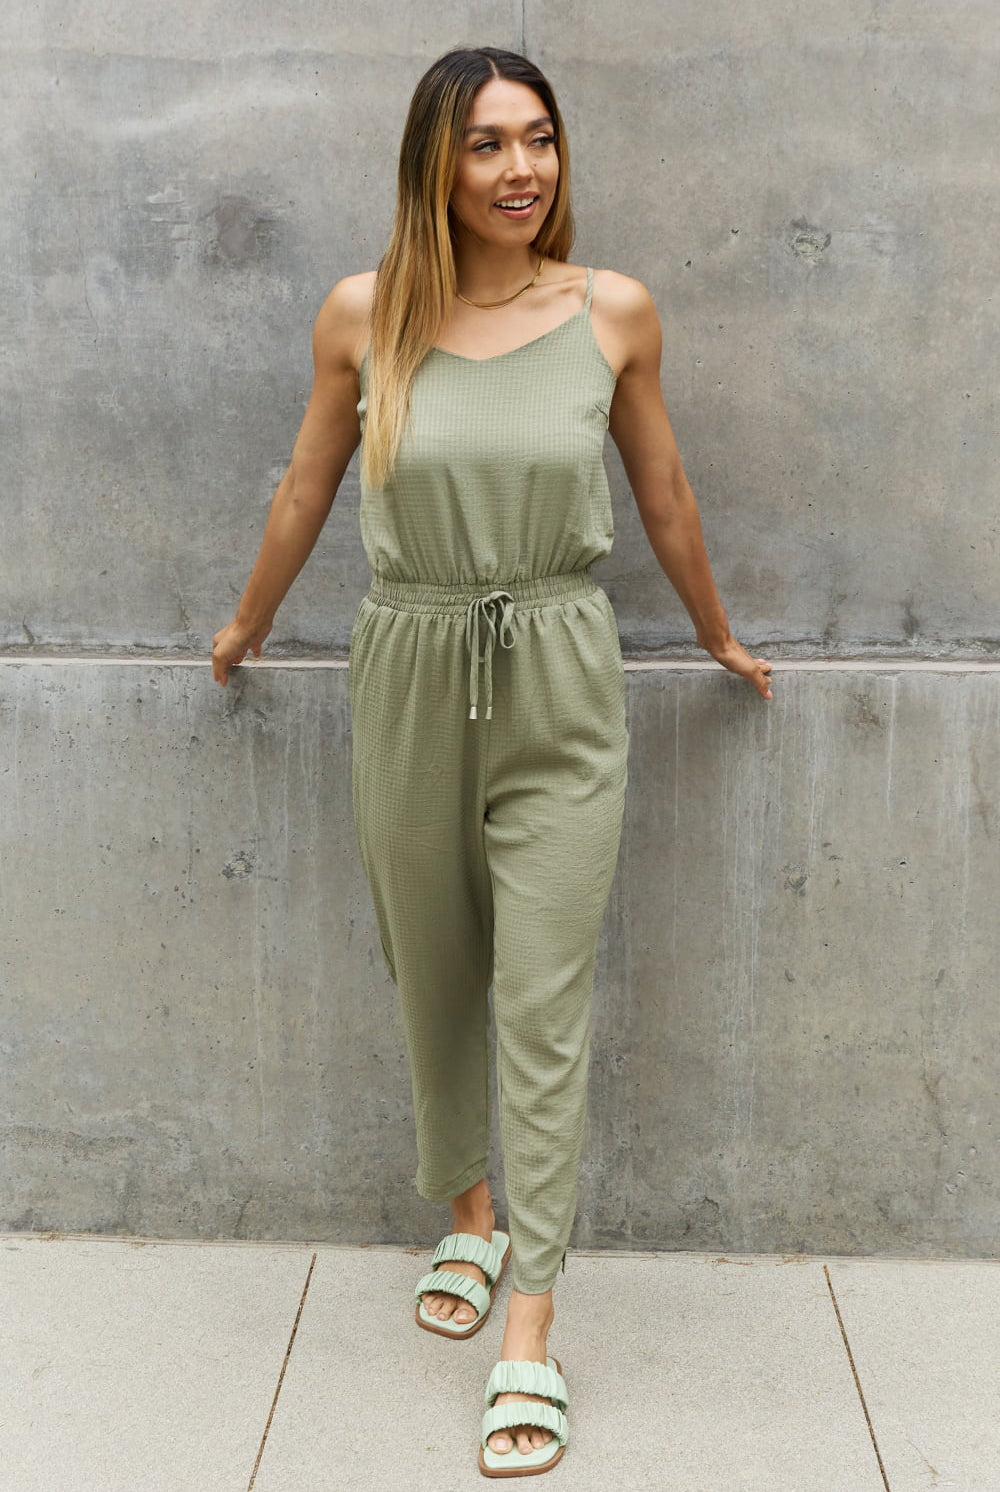 Rosy Brown My Future Textured Woven Jumpsuit in Sage Jumpsuits & Rompers